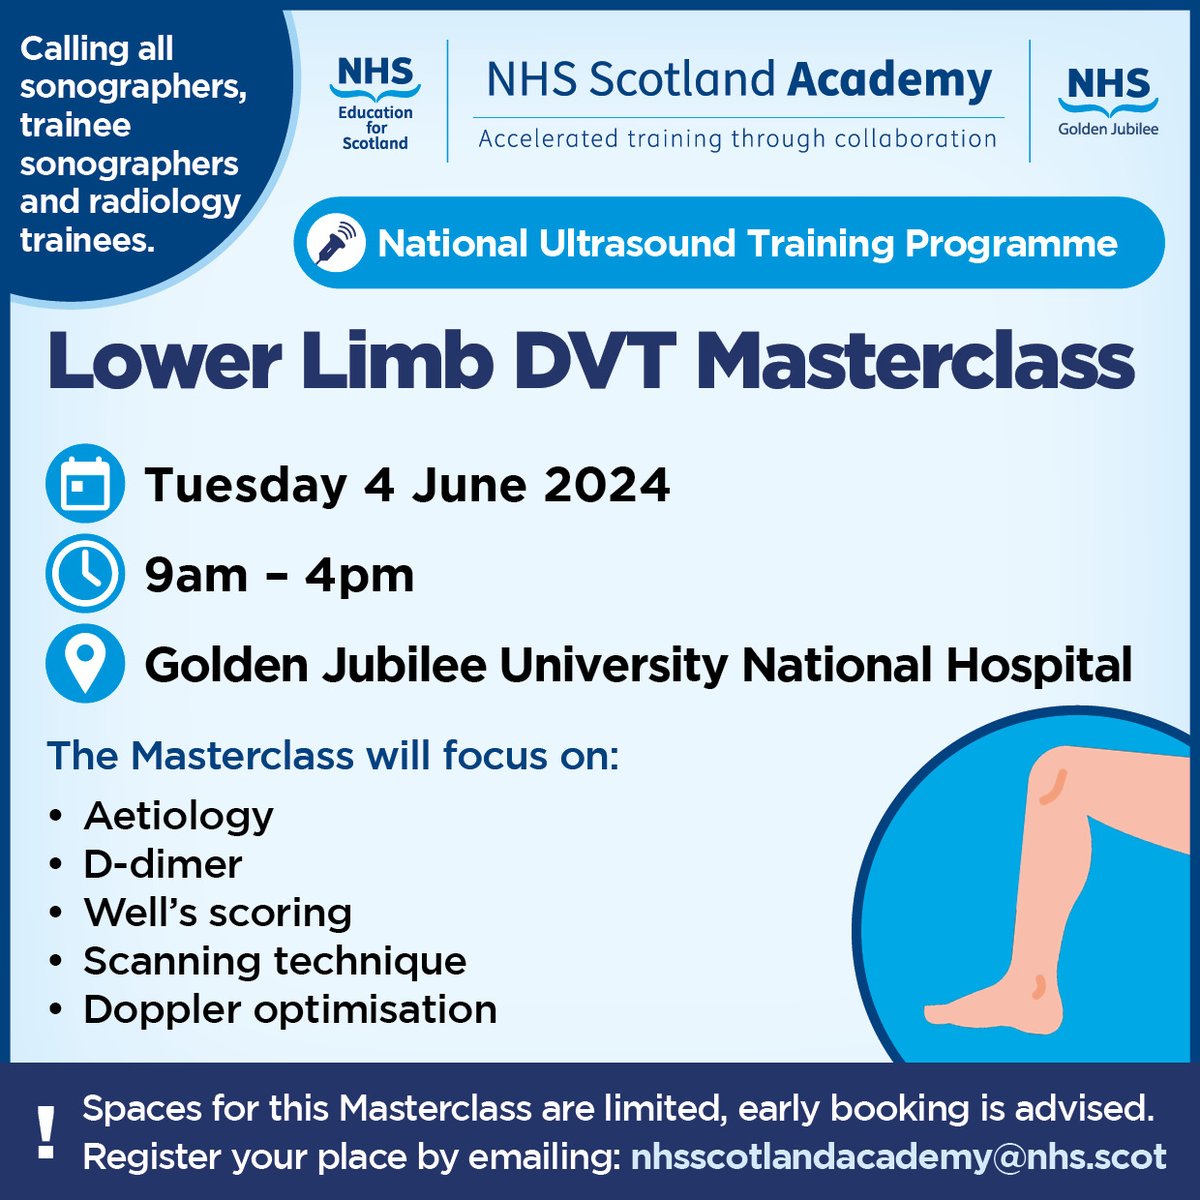 Calling all sonographers, trainee sonographers and radiology trainees📣The National Ultrasound Training Programme is running a Lower Limb DVT Masterclass on Tuesday 4 June, free of charge, @JubileeHospital!🏥Please email nhsscotlandacademy@nhs.scot to register your place